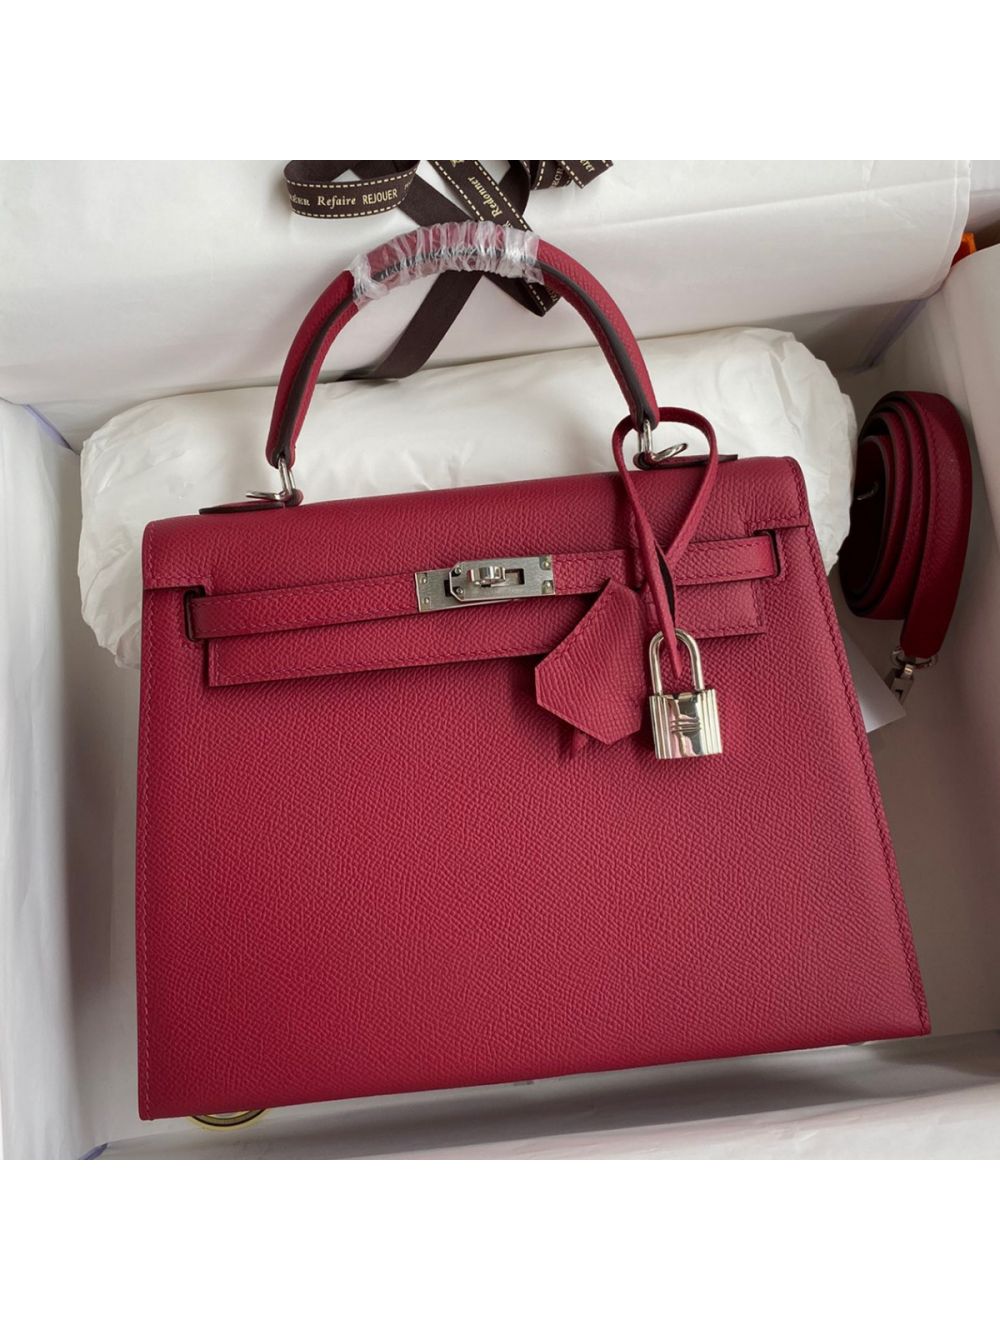 Replica Hermes Kelly Sellier 28 Handmade Bag In Red Ostrich Leather